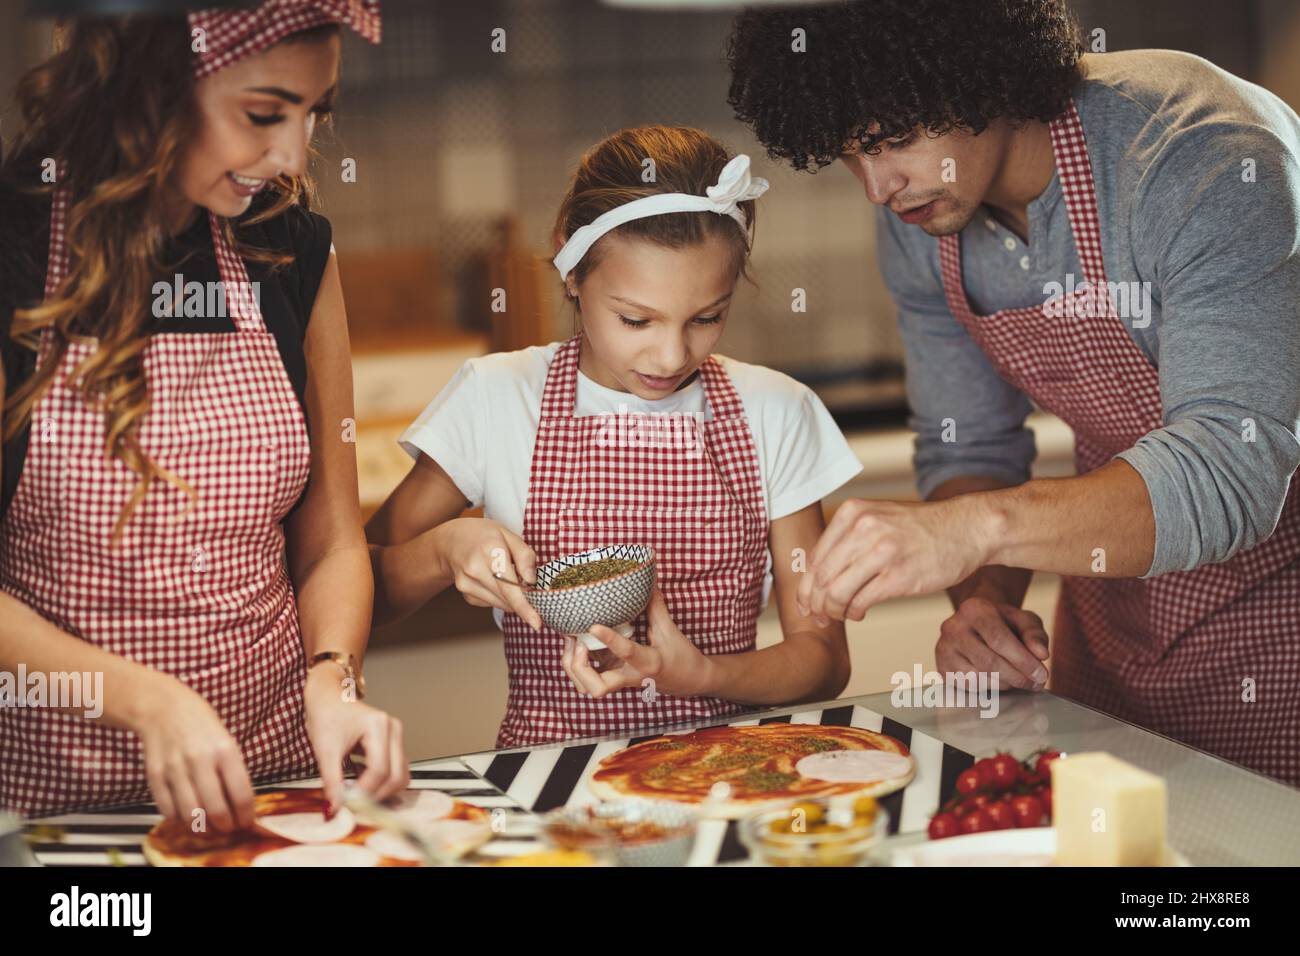 Happy parents and their daughter are preparing meal together in the kitchen while little girl is putting ketchup on the pizza dough. Stock Photo